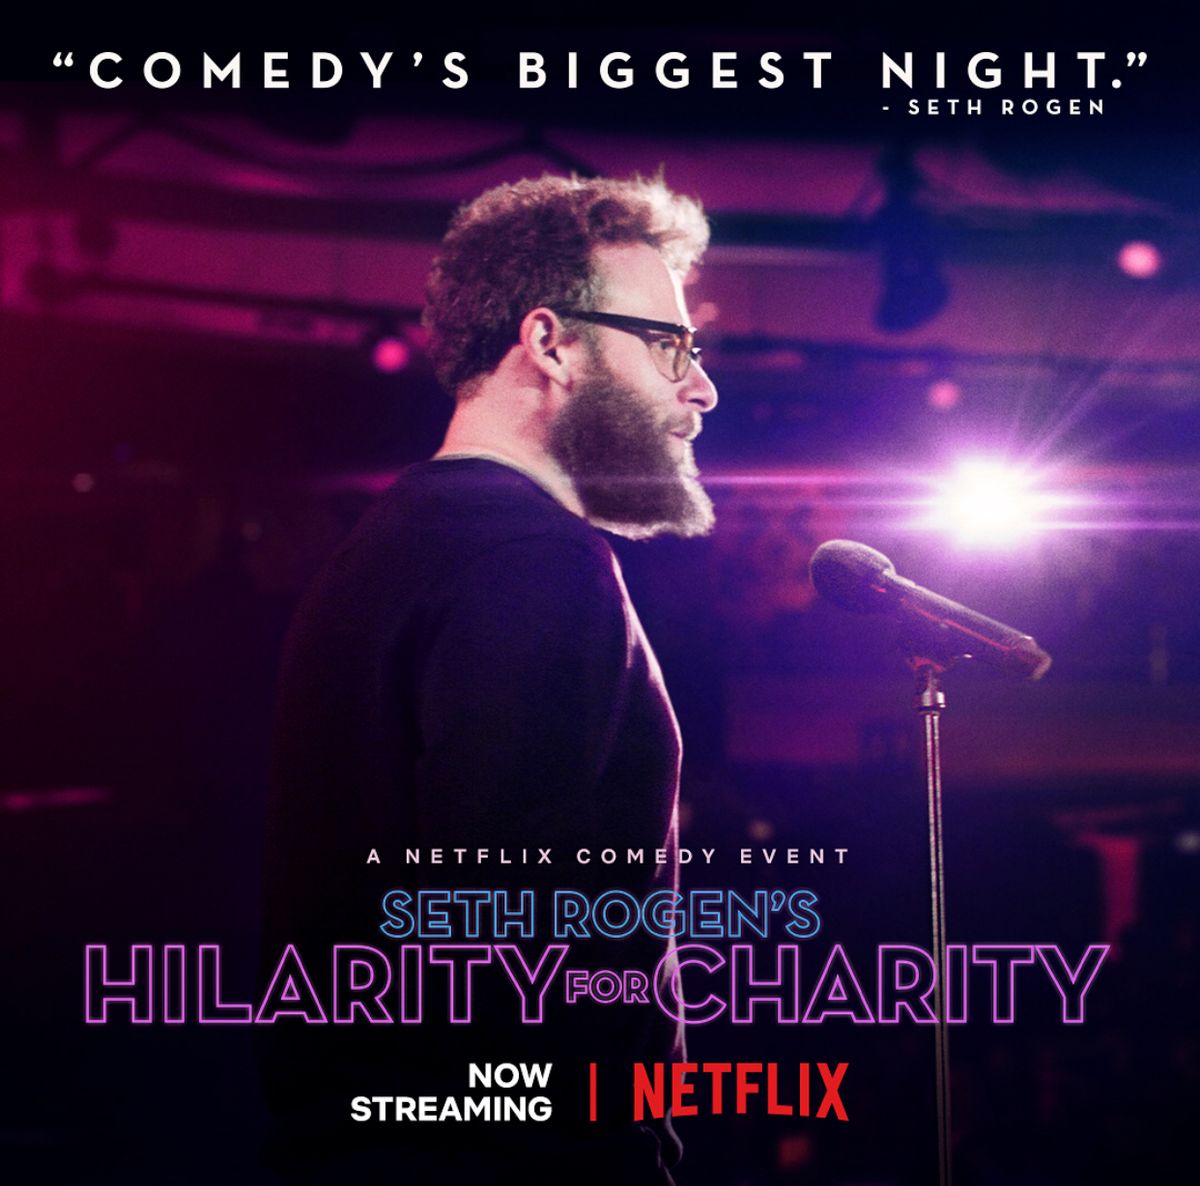 Hilarity For Charity Brings Laughs and Awareness